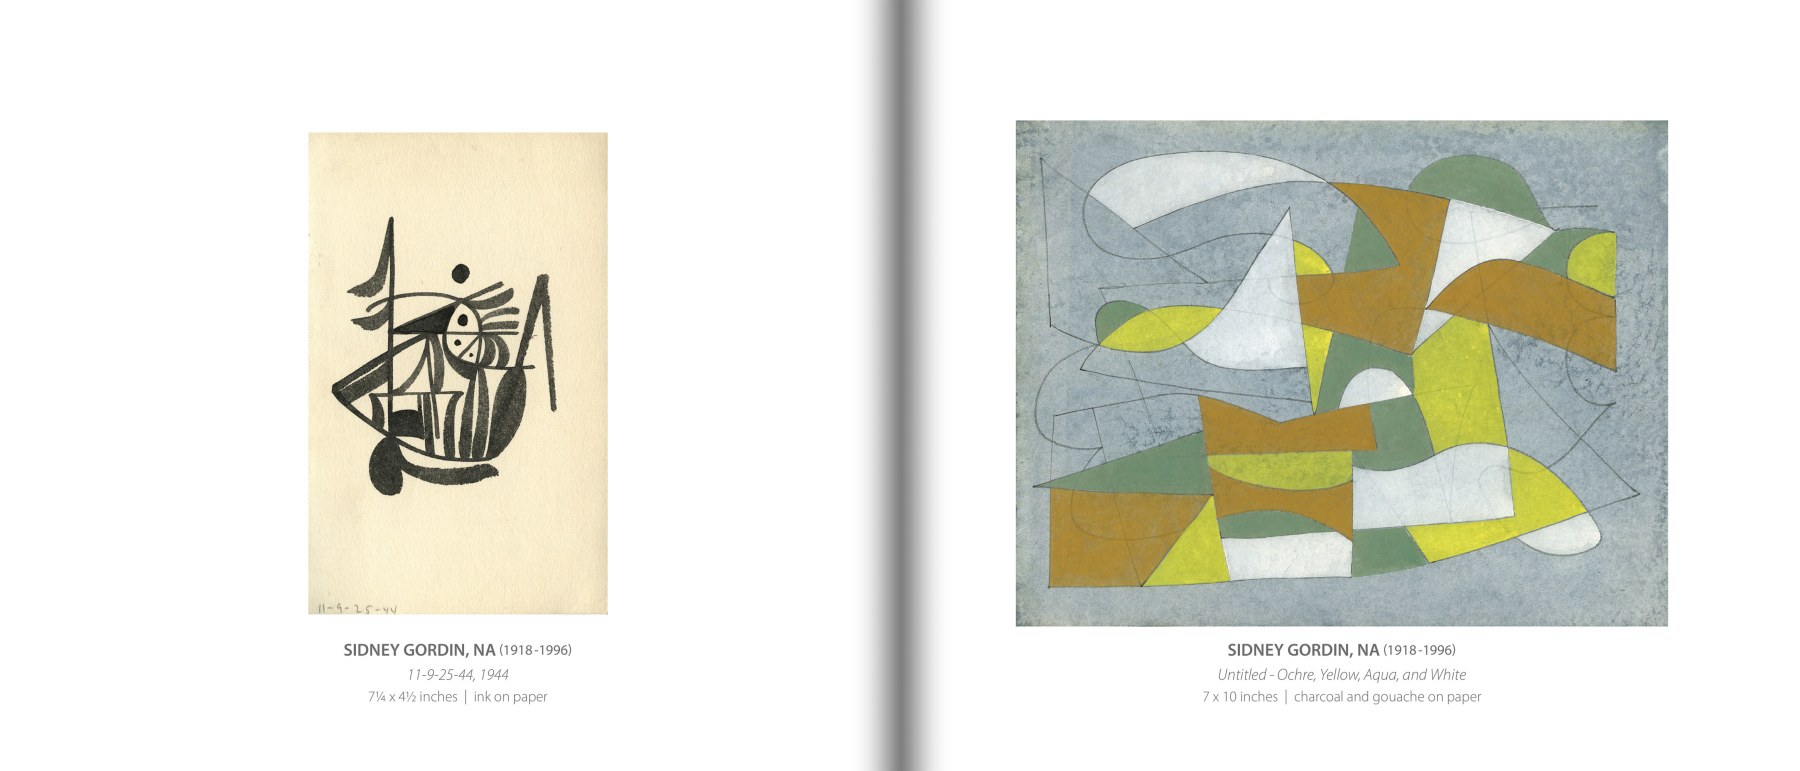 Internal pages of AN EVEN DOZEN catalog, including images of &quot;11-9-25-44&quot; and &quot;Untitled - Ochre, yellow, Aqua, and White&quot; by SIDNEY GORDIN (1918-1996)